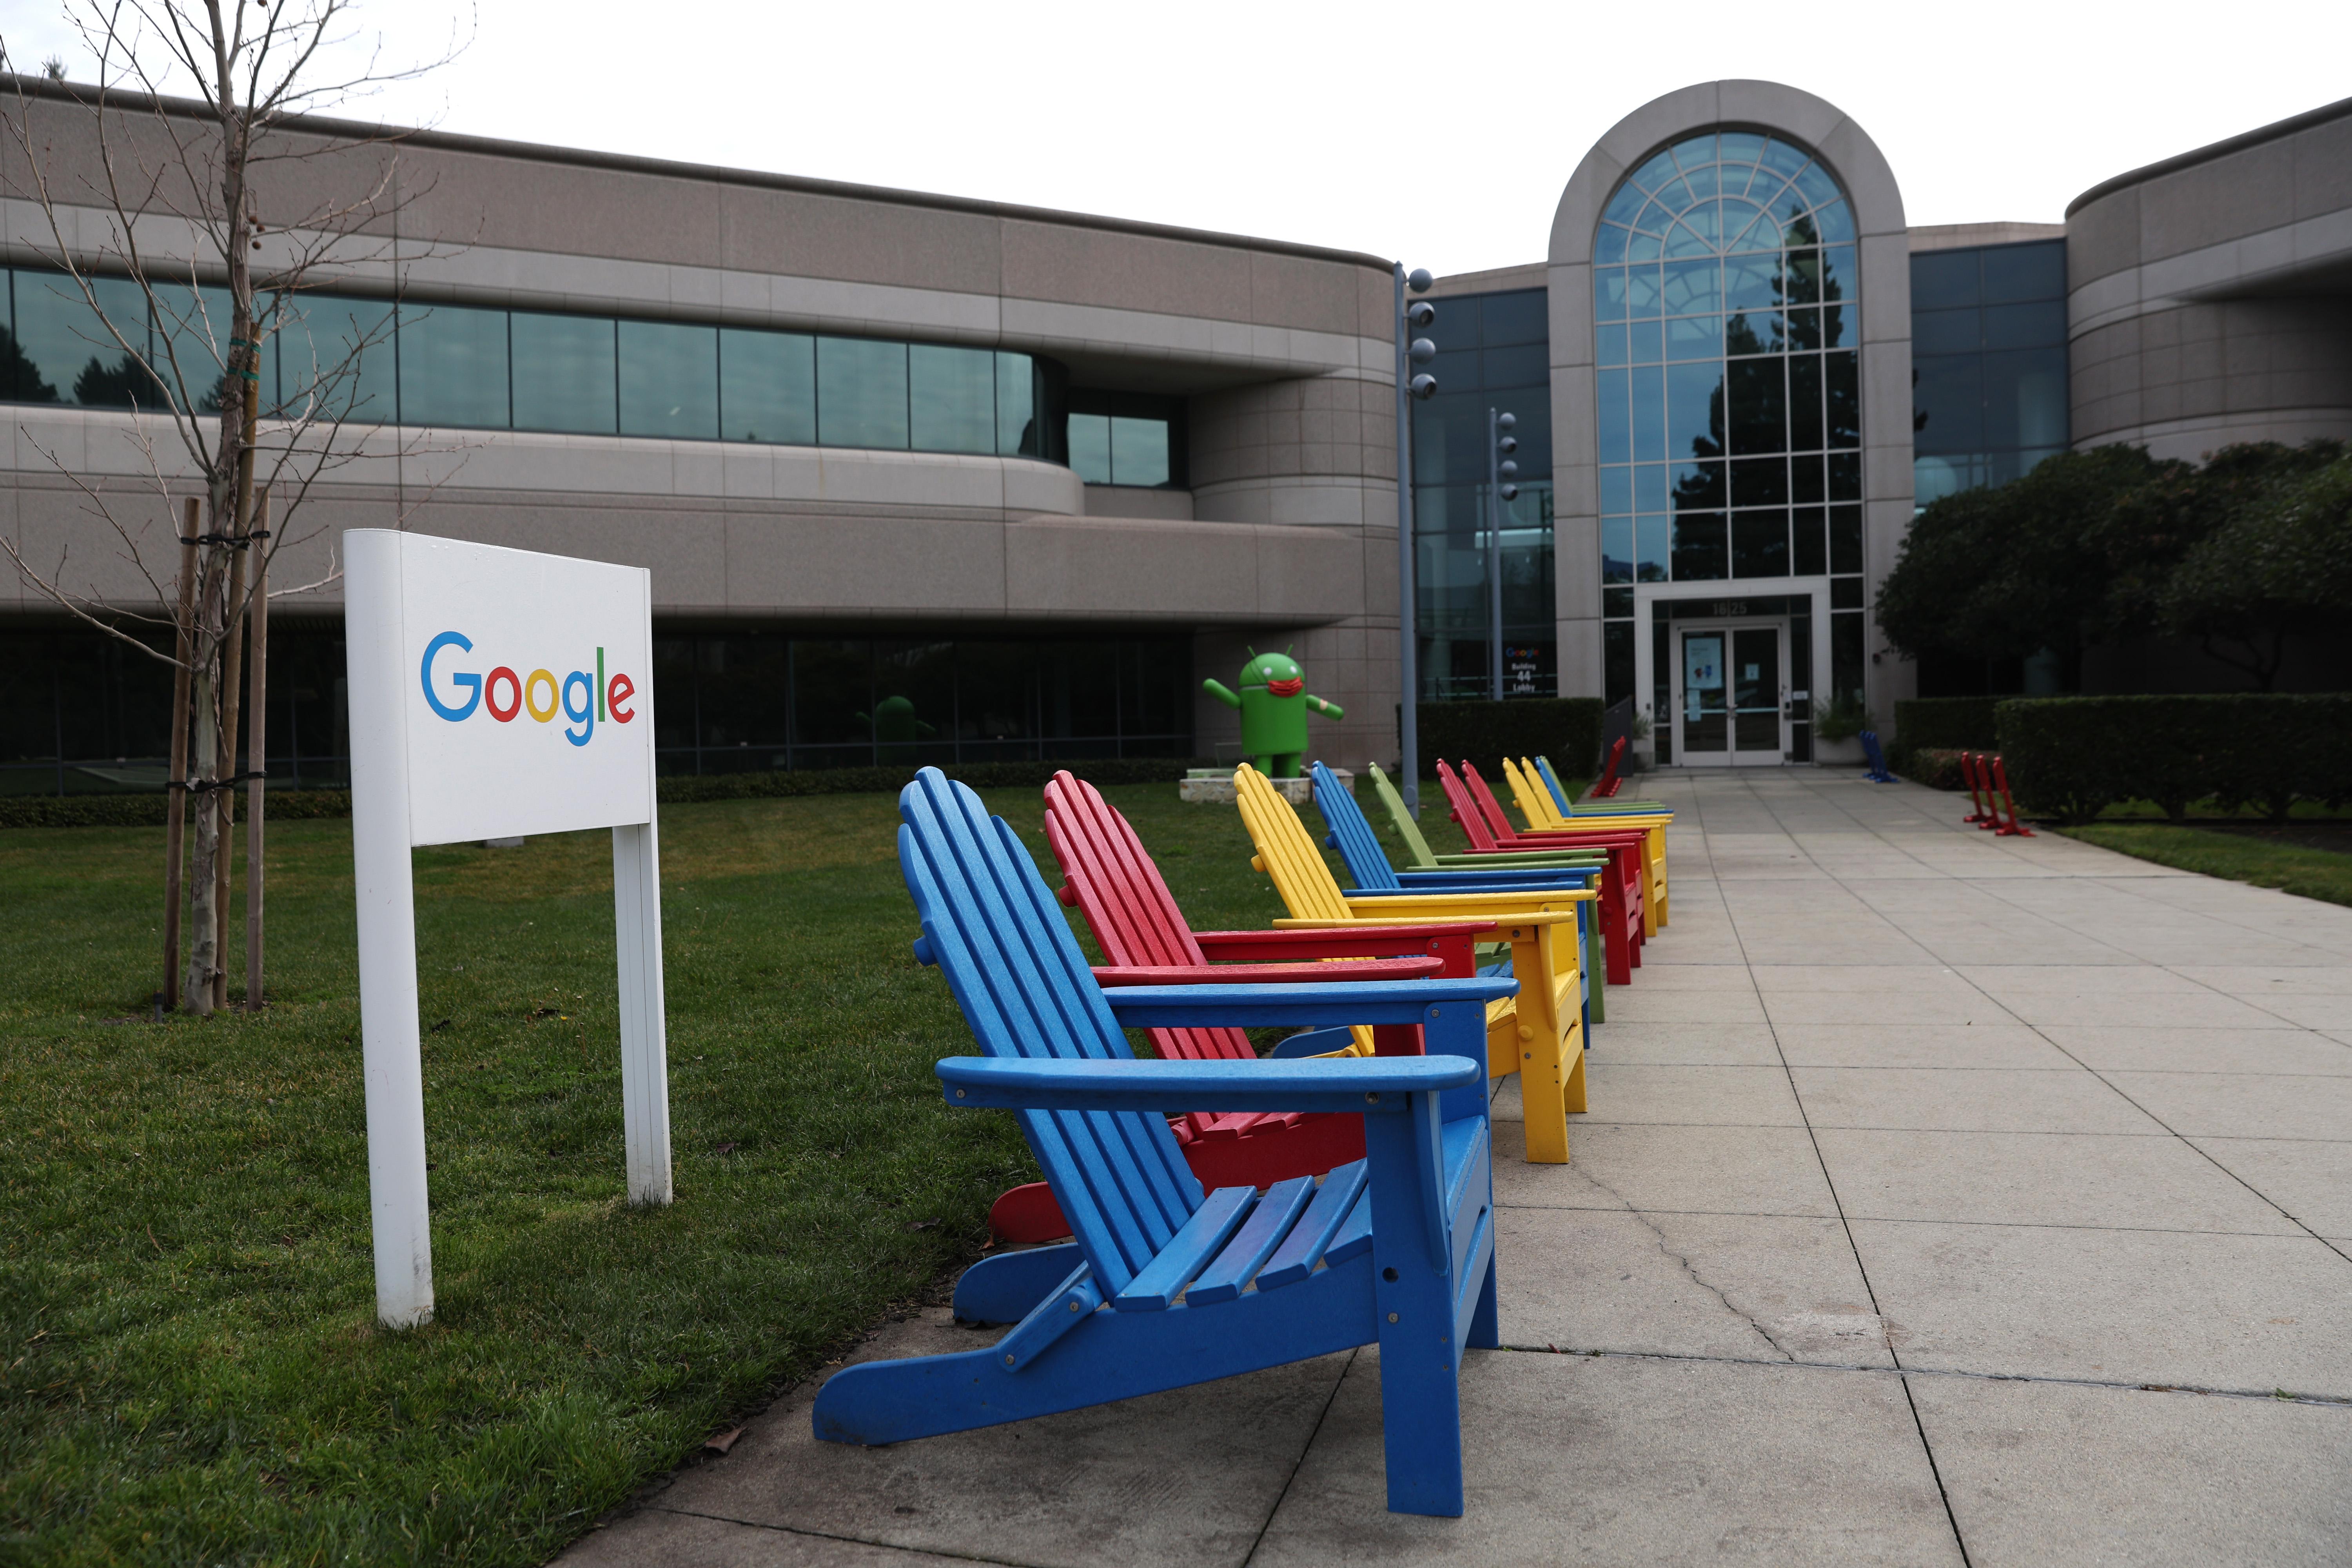 MOUNTAIN VIEW, CALIFORNIA - JANUARY 31: A sign is posted in front of a building on the Google campus on January 31, 2022 in Mountain View, California. Google parent company Alphabet will report fourth quarter earnings on Tuesday after the closing bell. (Photo by Justin Sullivan/Getty Images)